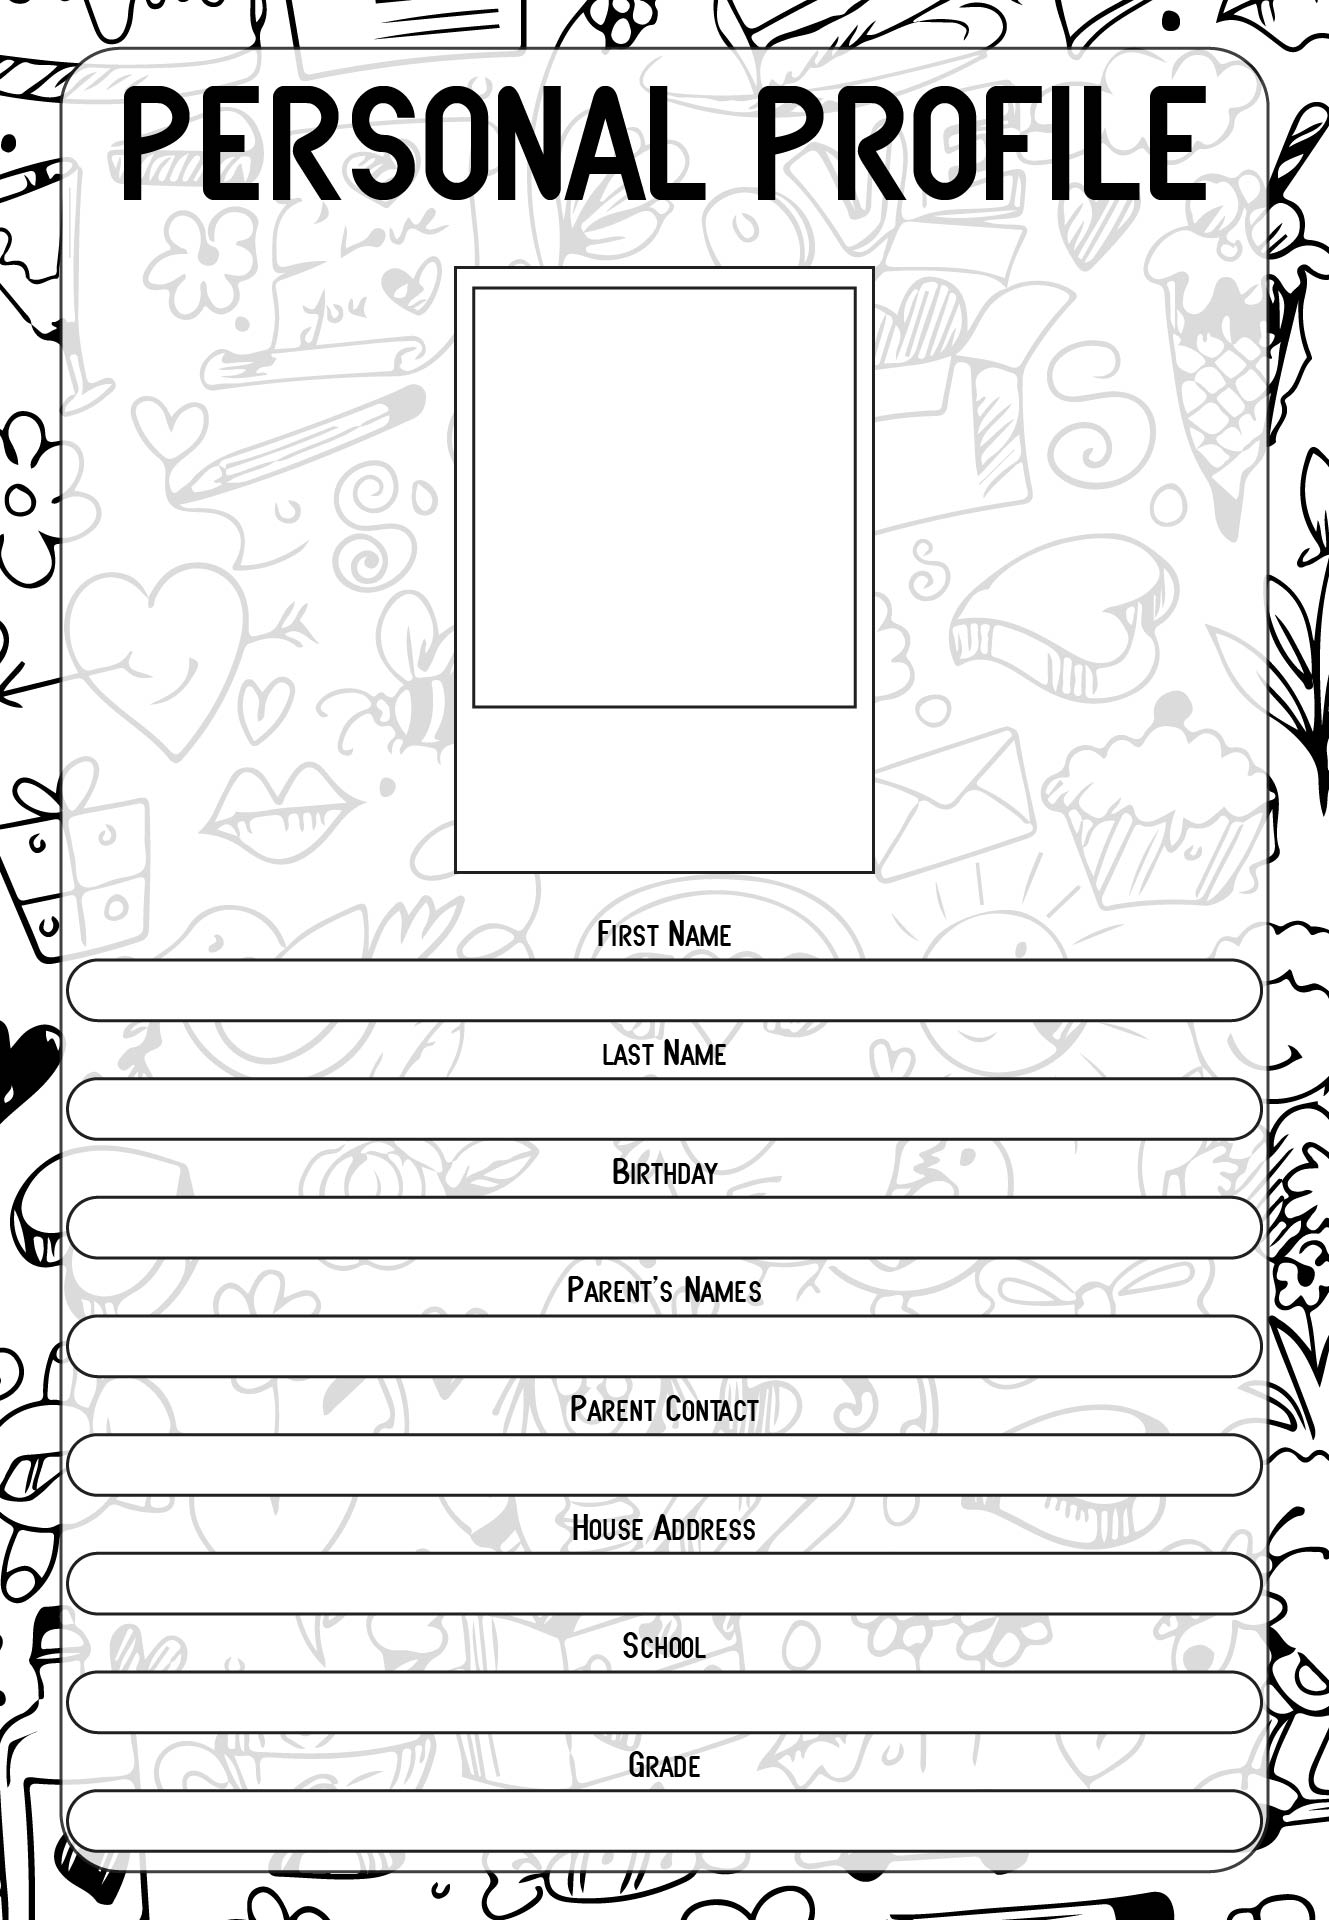 Self Profile Worksheets for Elementary Students